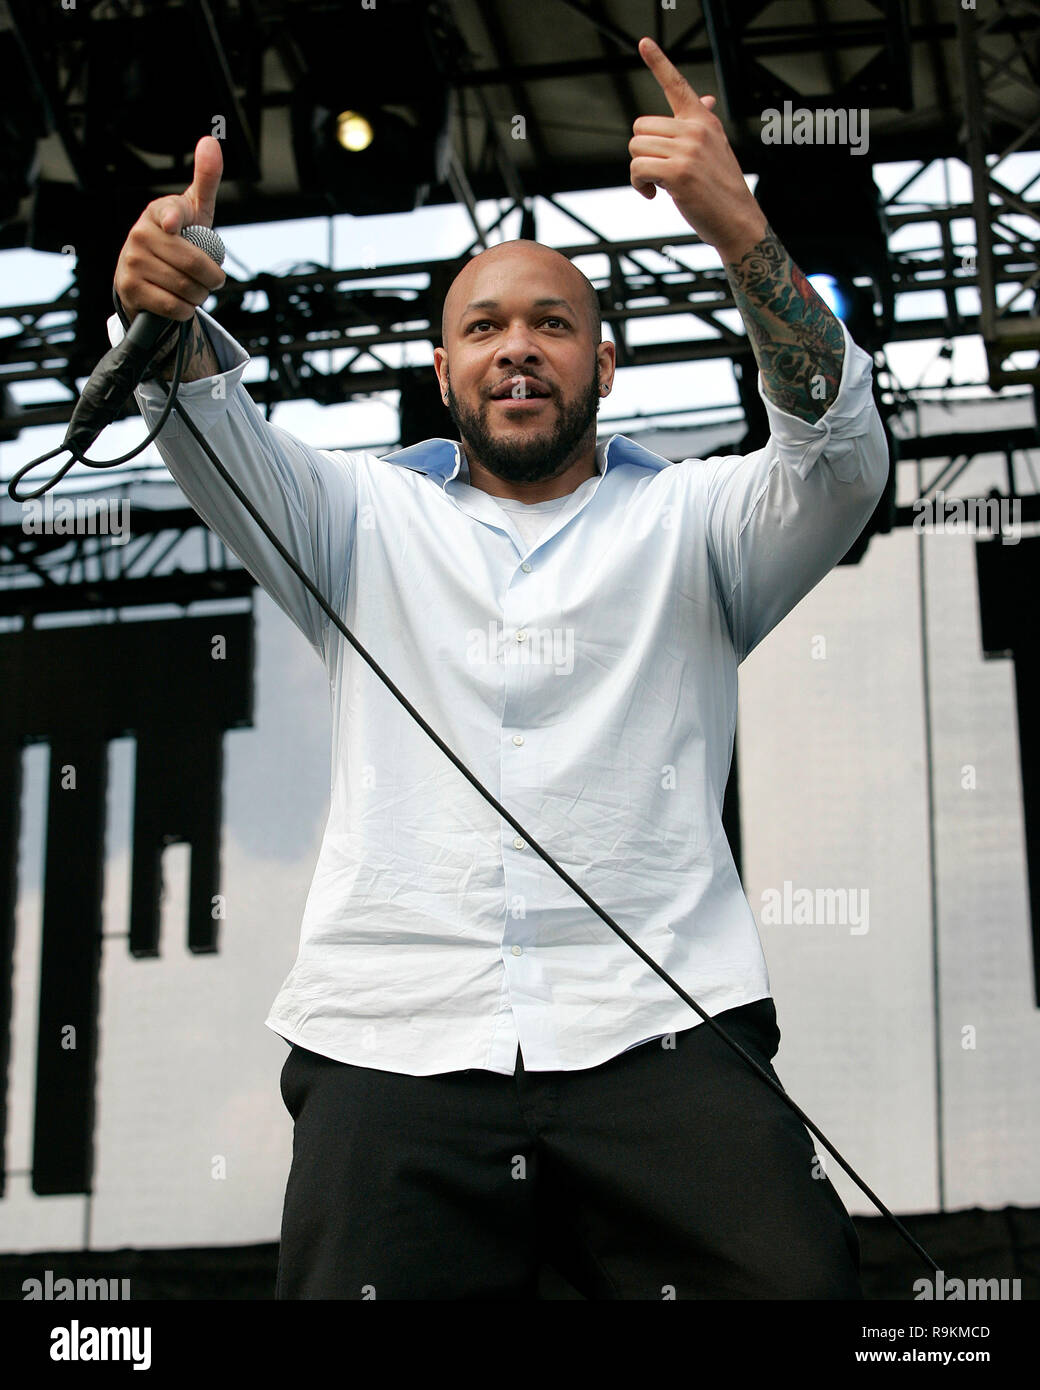 Howard Jones with Killswitch Engage performs in concert at the Global Gathering 2006 Festival at the Bicentennial Park in Miami, Florida on March 18, 2006. Stock Photo